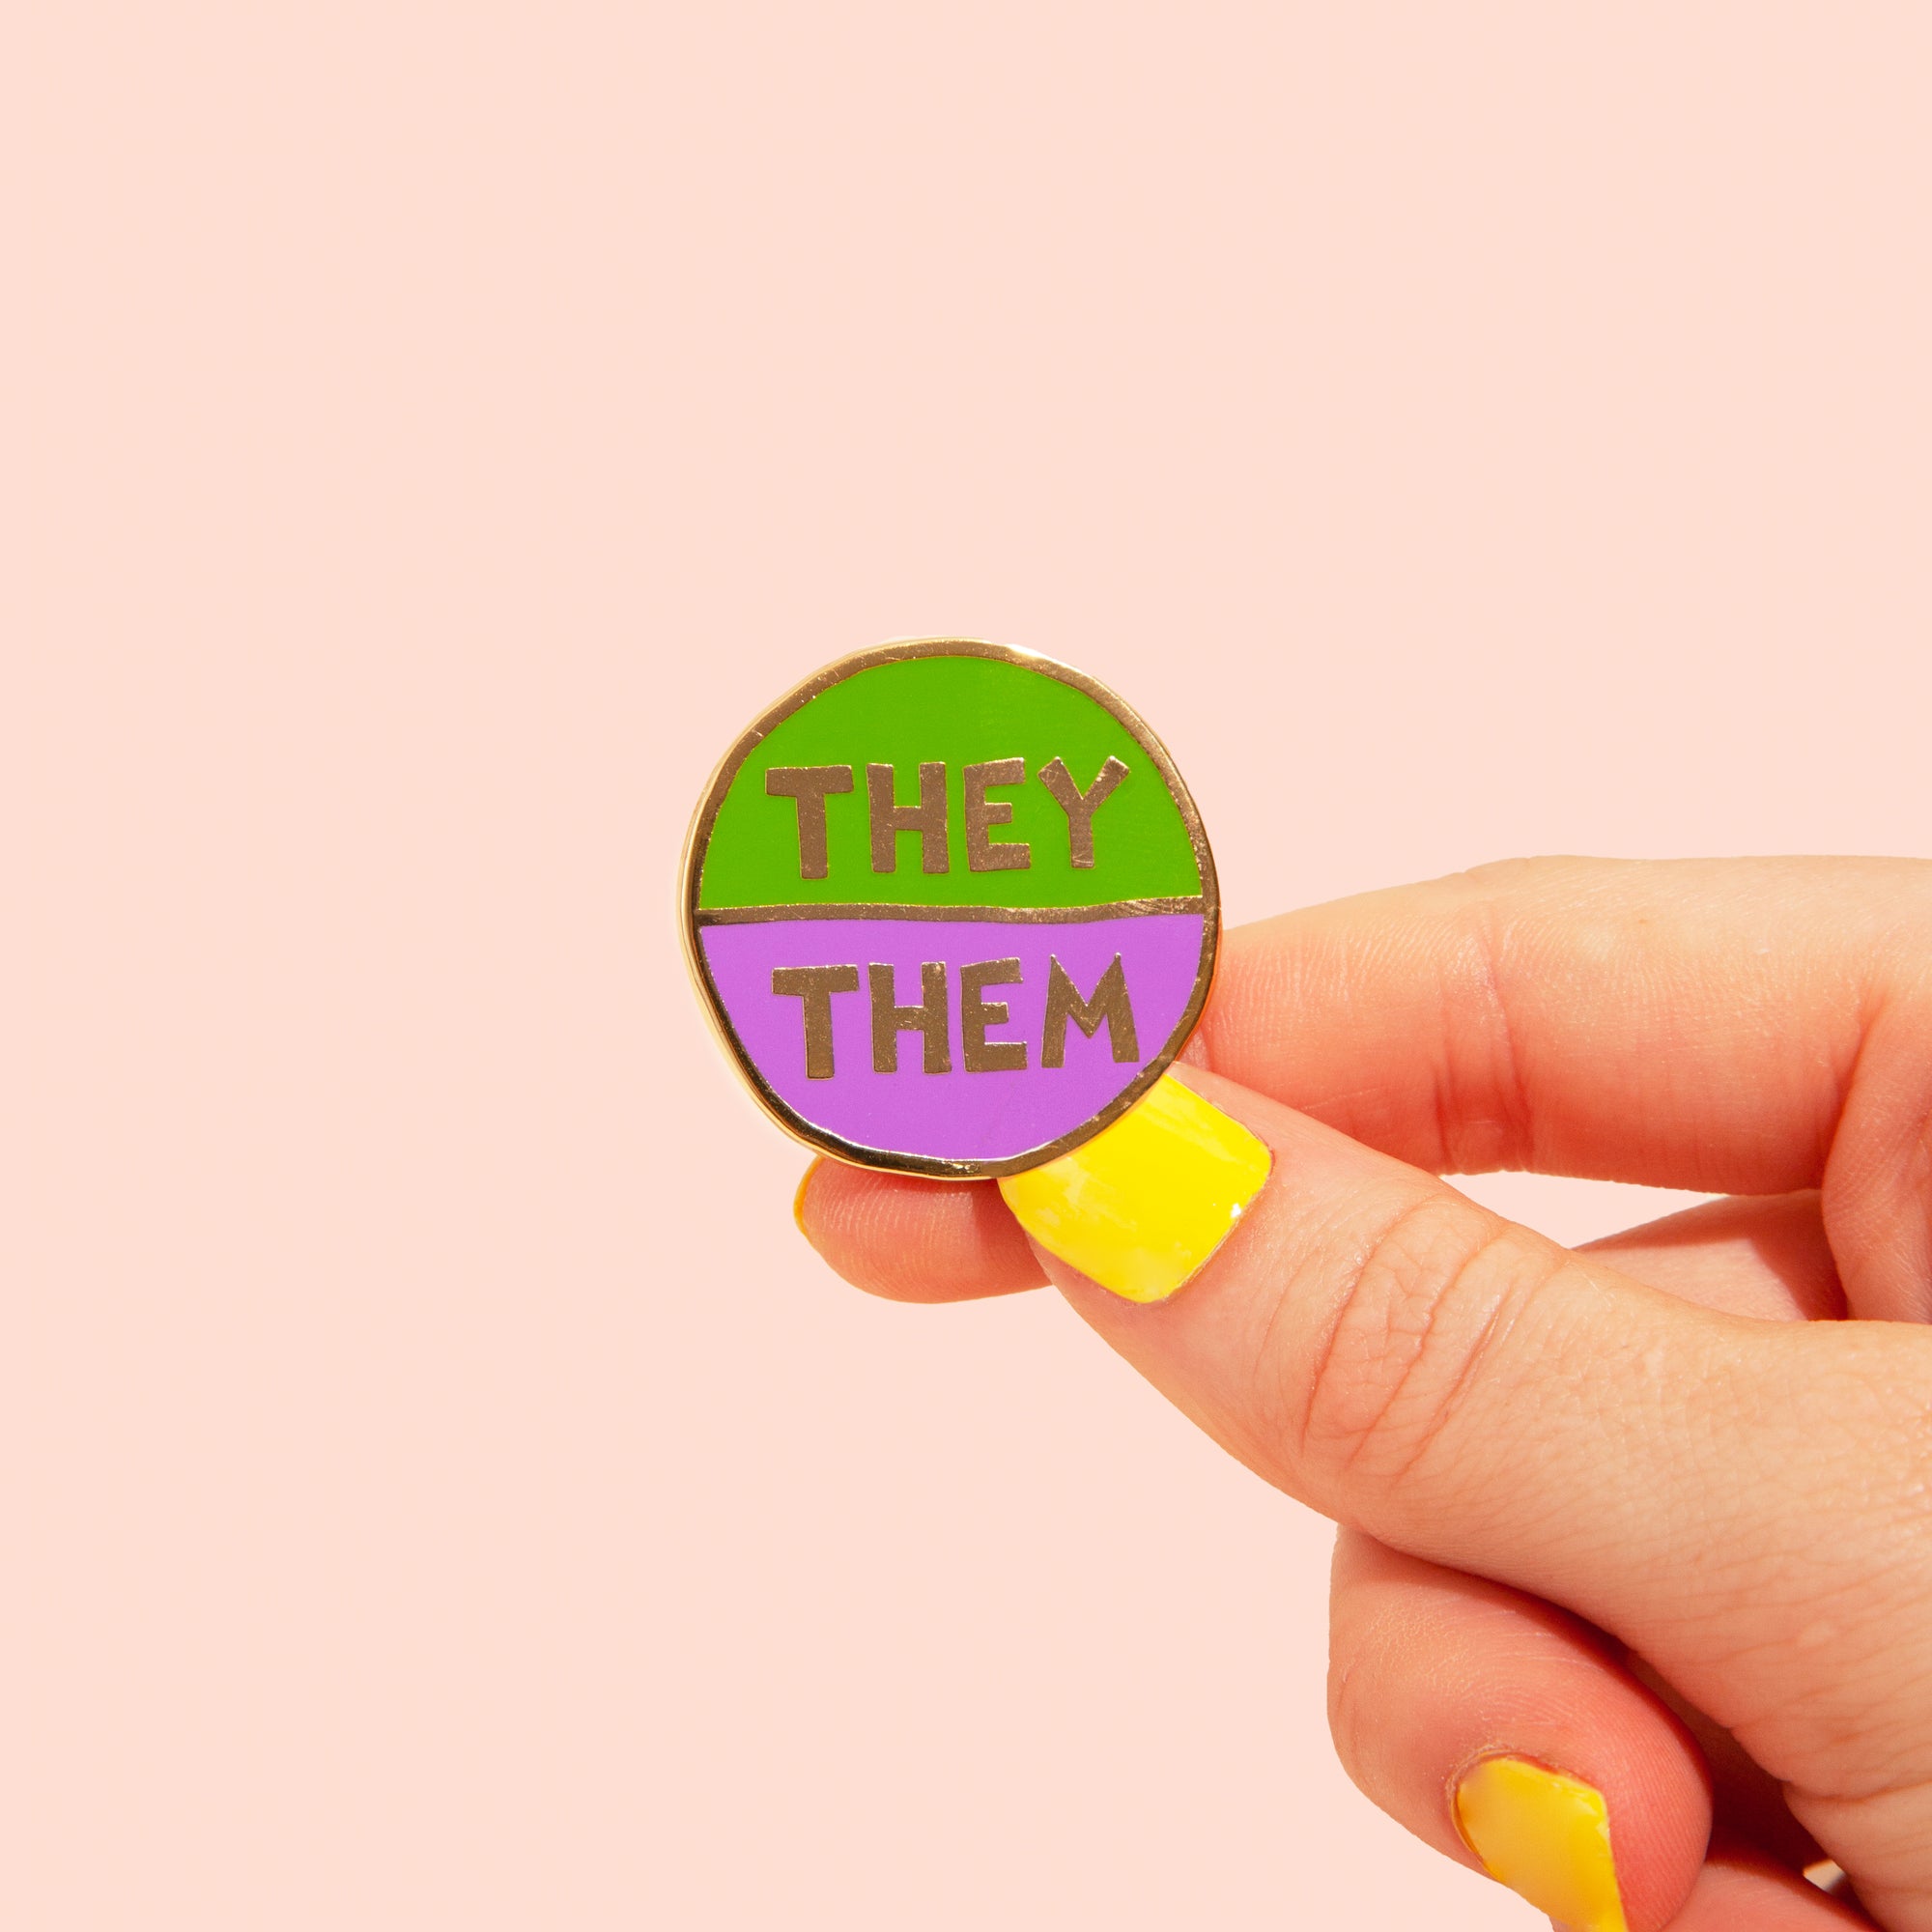 They/Them Pin